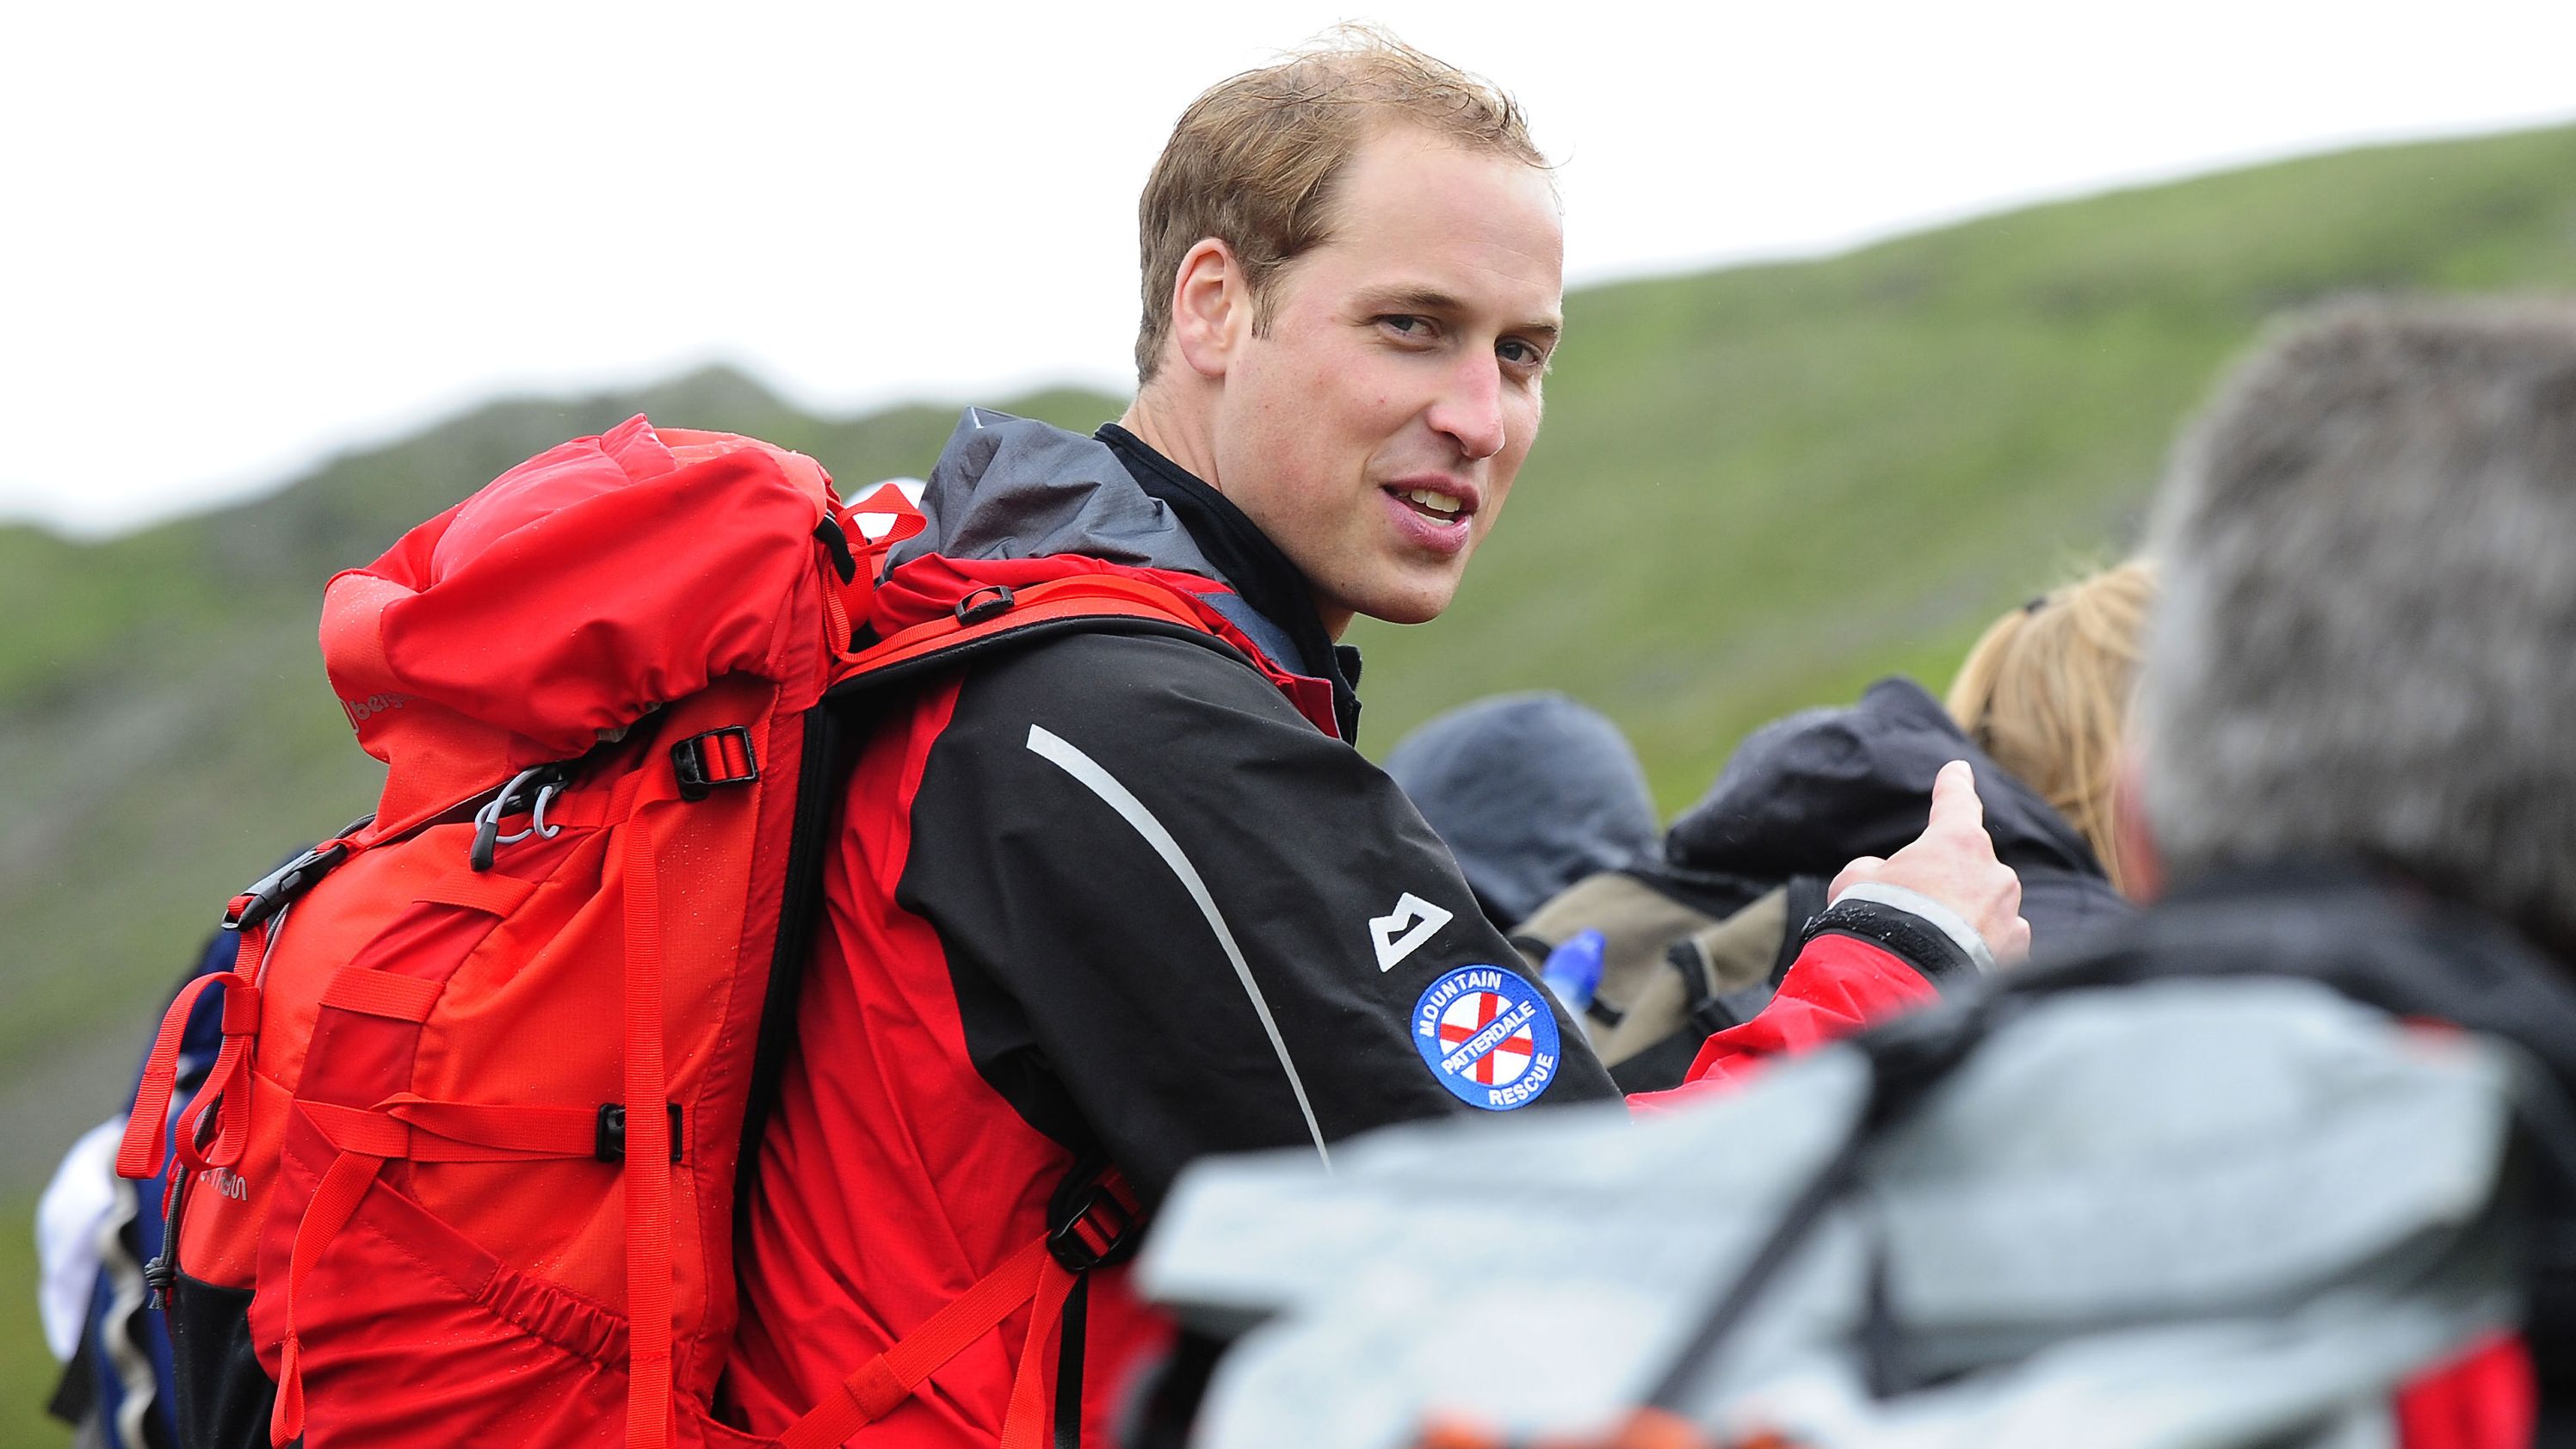 Prince William walks with a group of homeless people during a 2009 hike with Centrepoint, the United Kingdom's largest youth charity for the homeless. William became the patron of the organization in 2005.